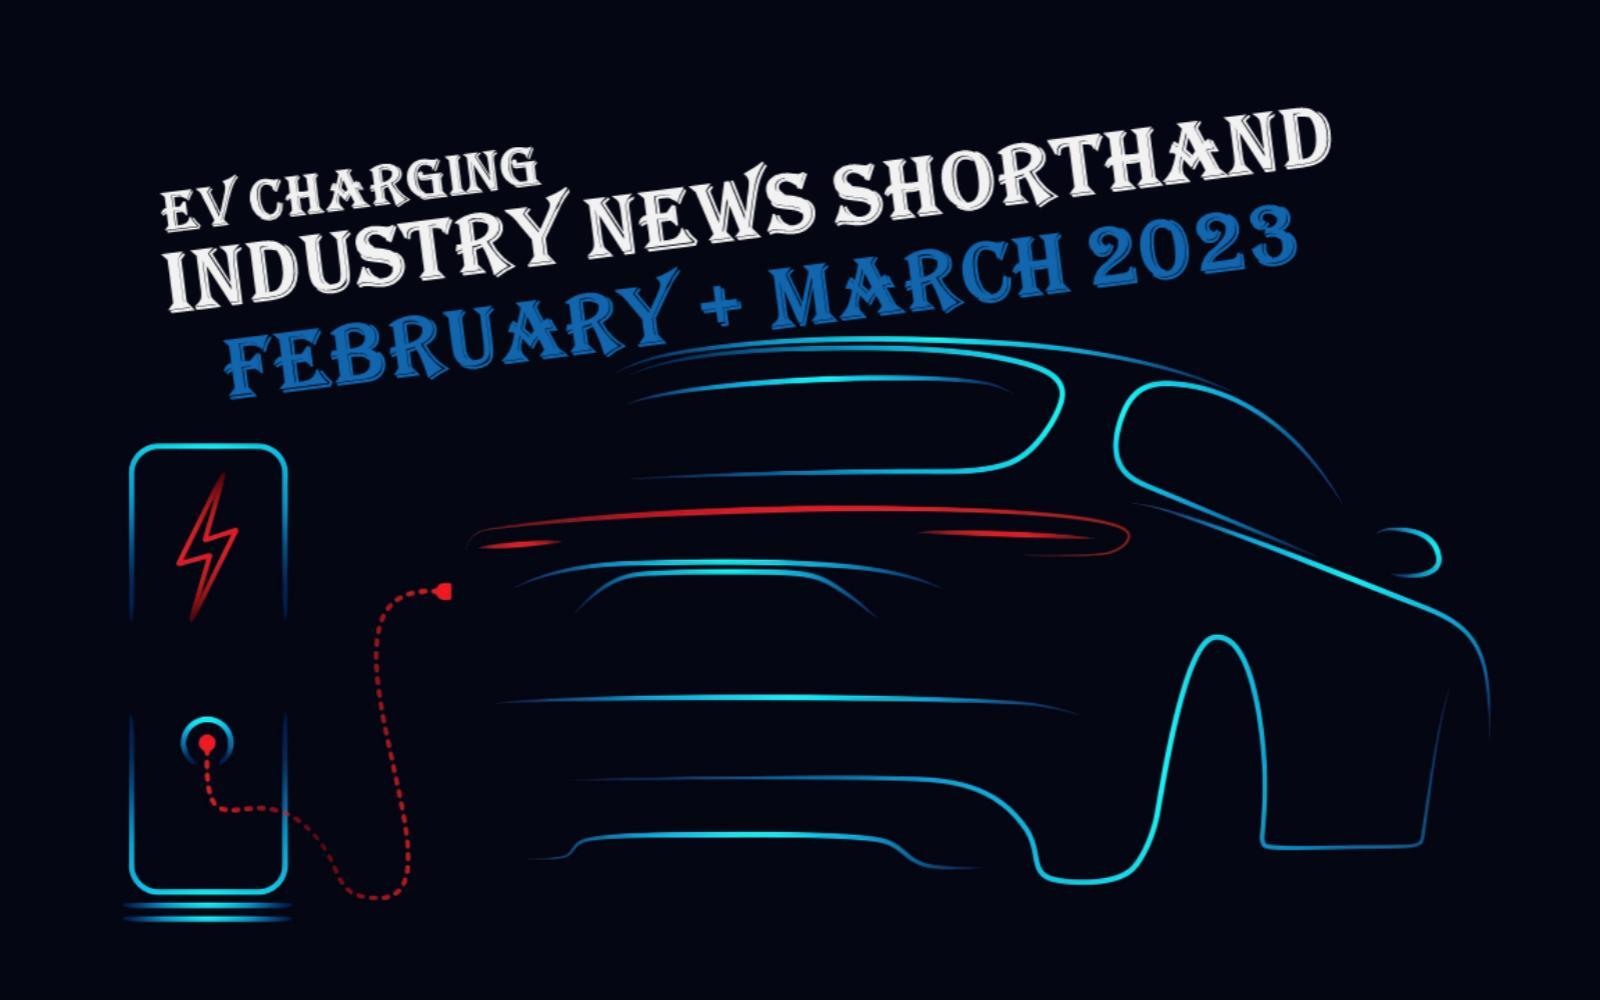 February & March 2023 EV charging industry news summary